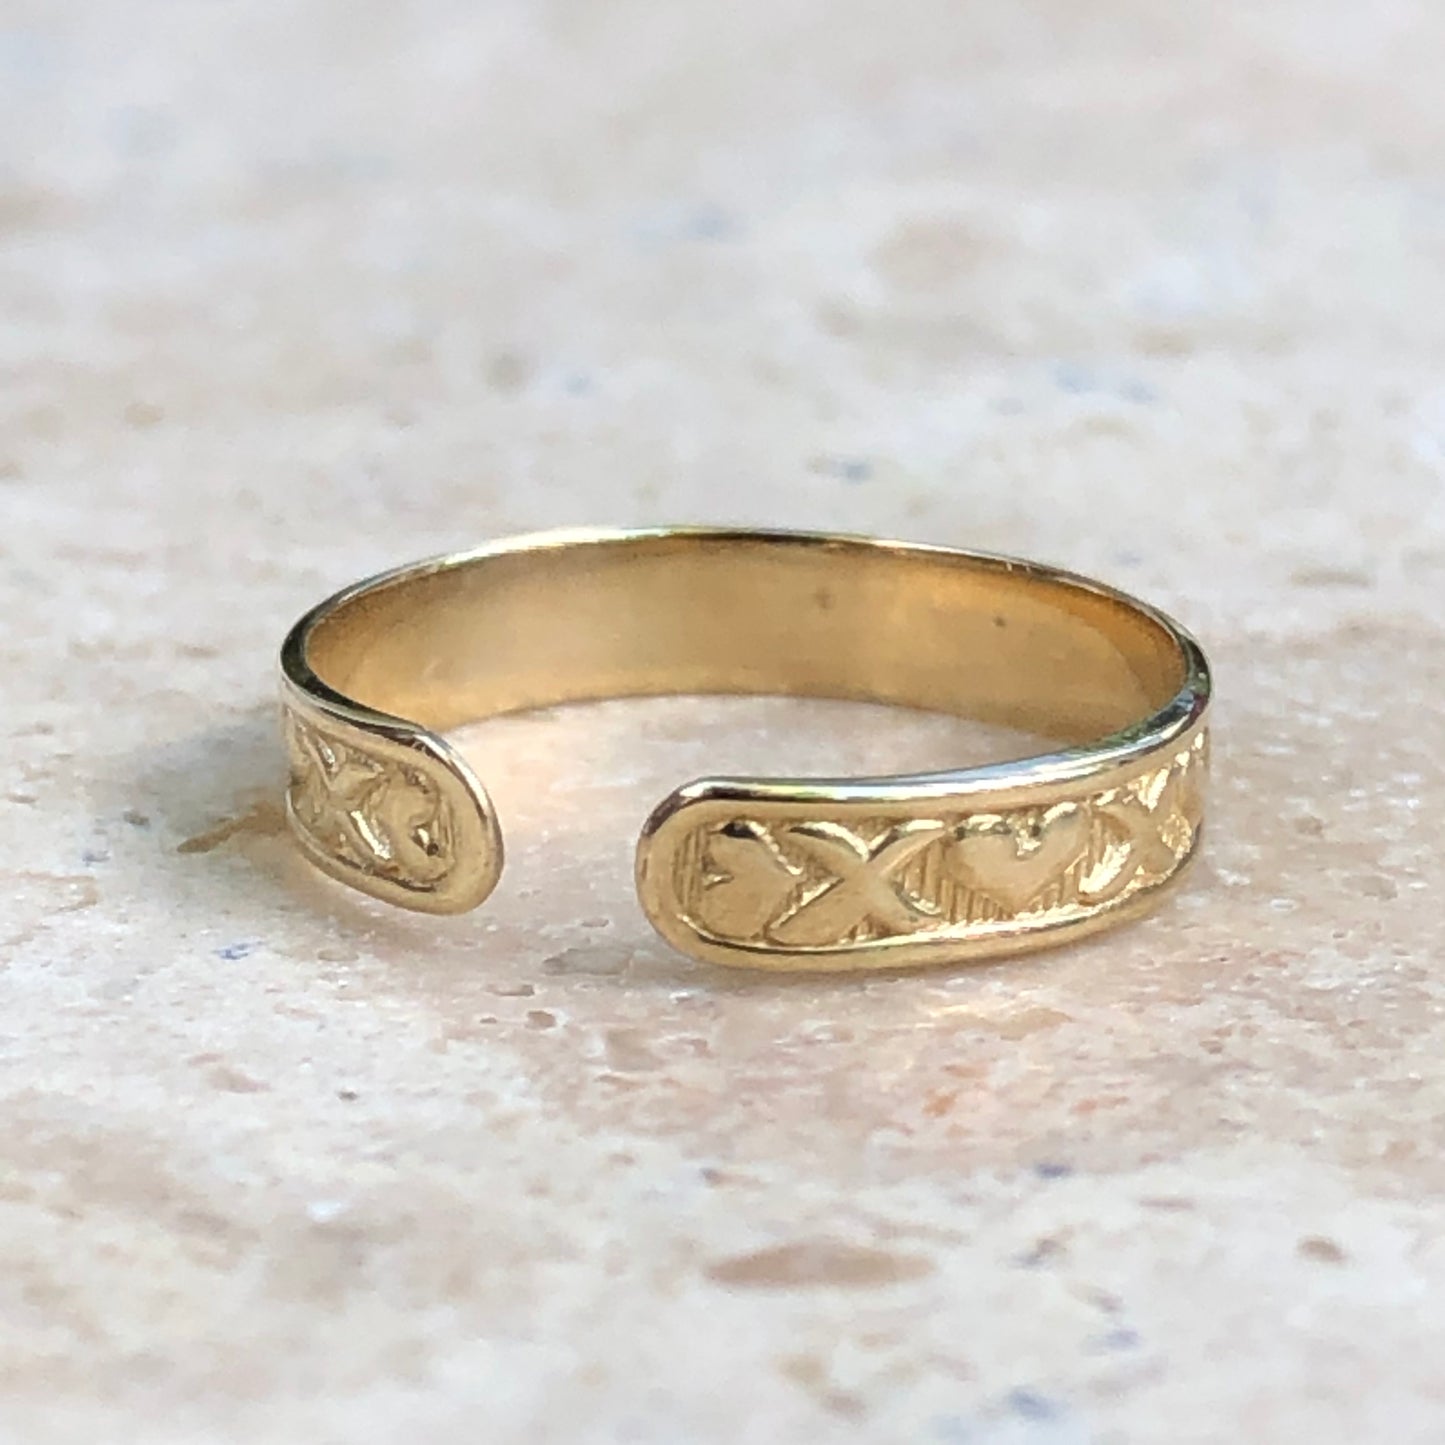 14KT Yellow Gold Patterned Hearts Toe Ring, 14KT Yellow Gold Patterned Hearts Toe Ring - Legacy Saint Jewelry